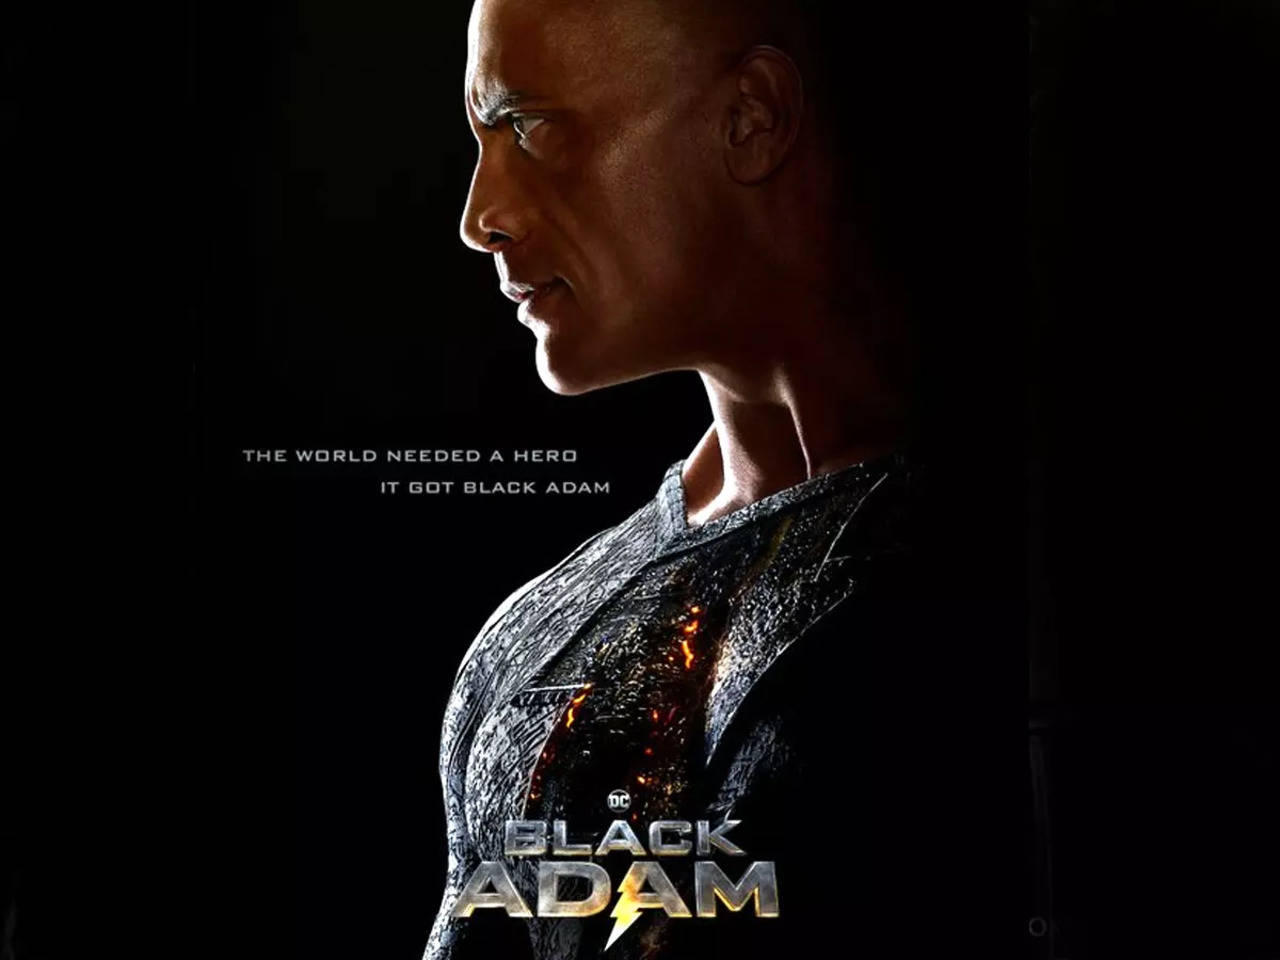 black adam box office collection: Dwayne Johnson starrer Black Adam's Day 2  India collections far behind post-pandemic Marvel releases - The Economic  Times